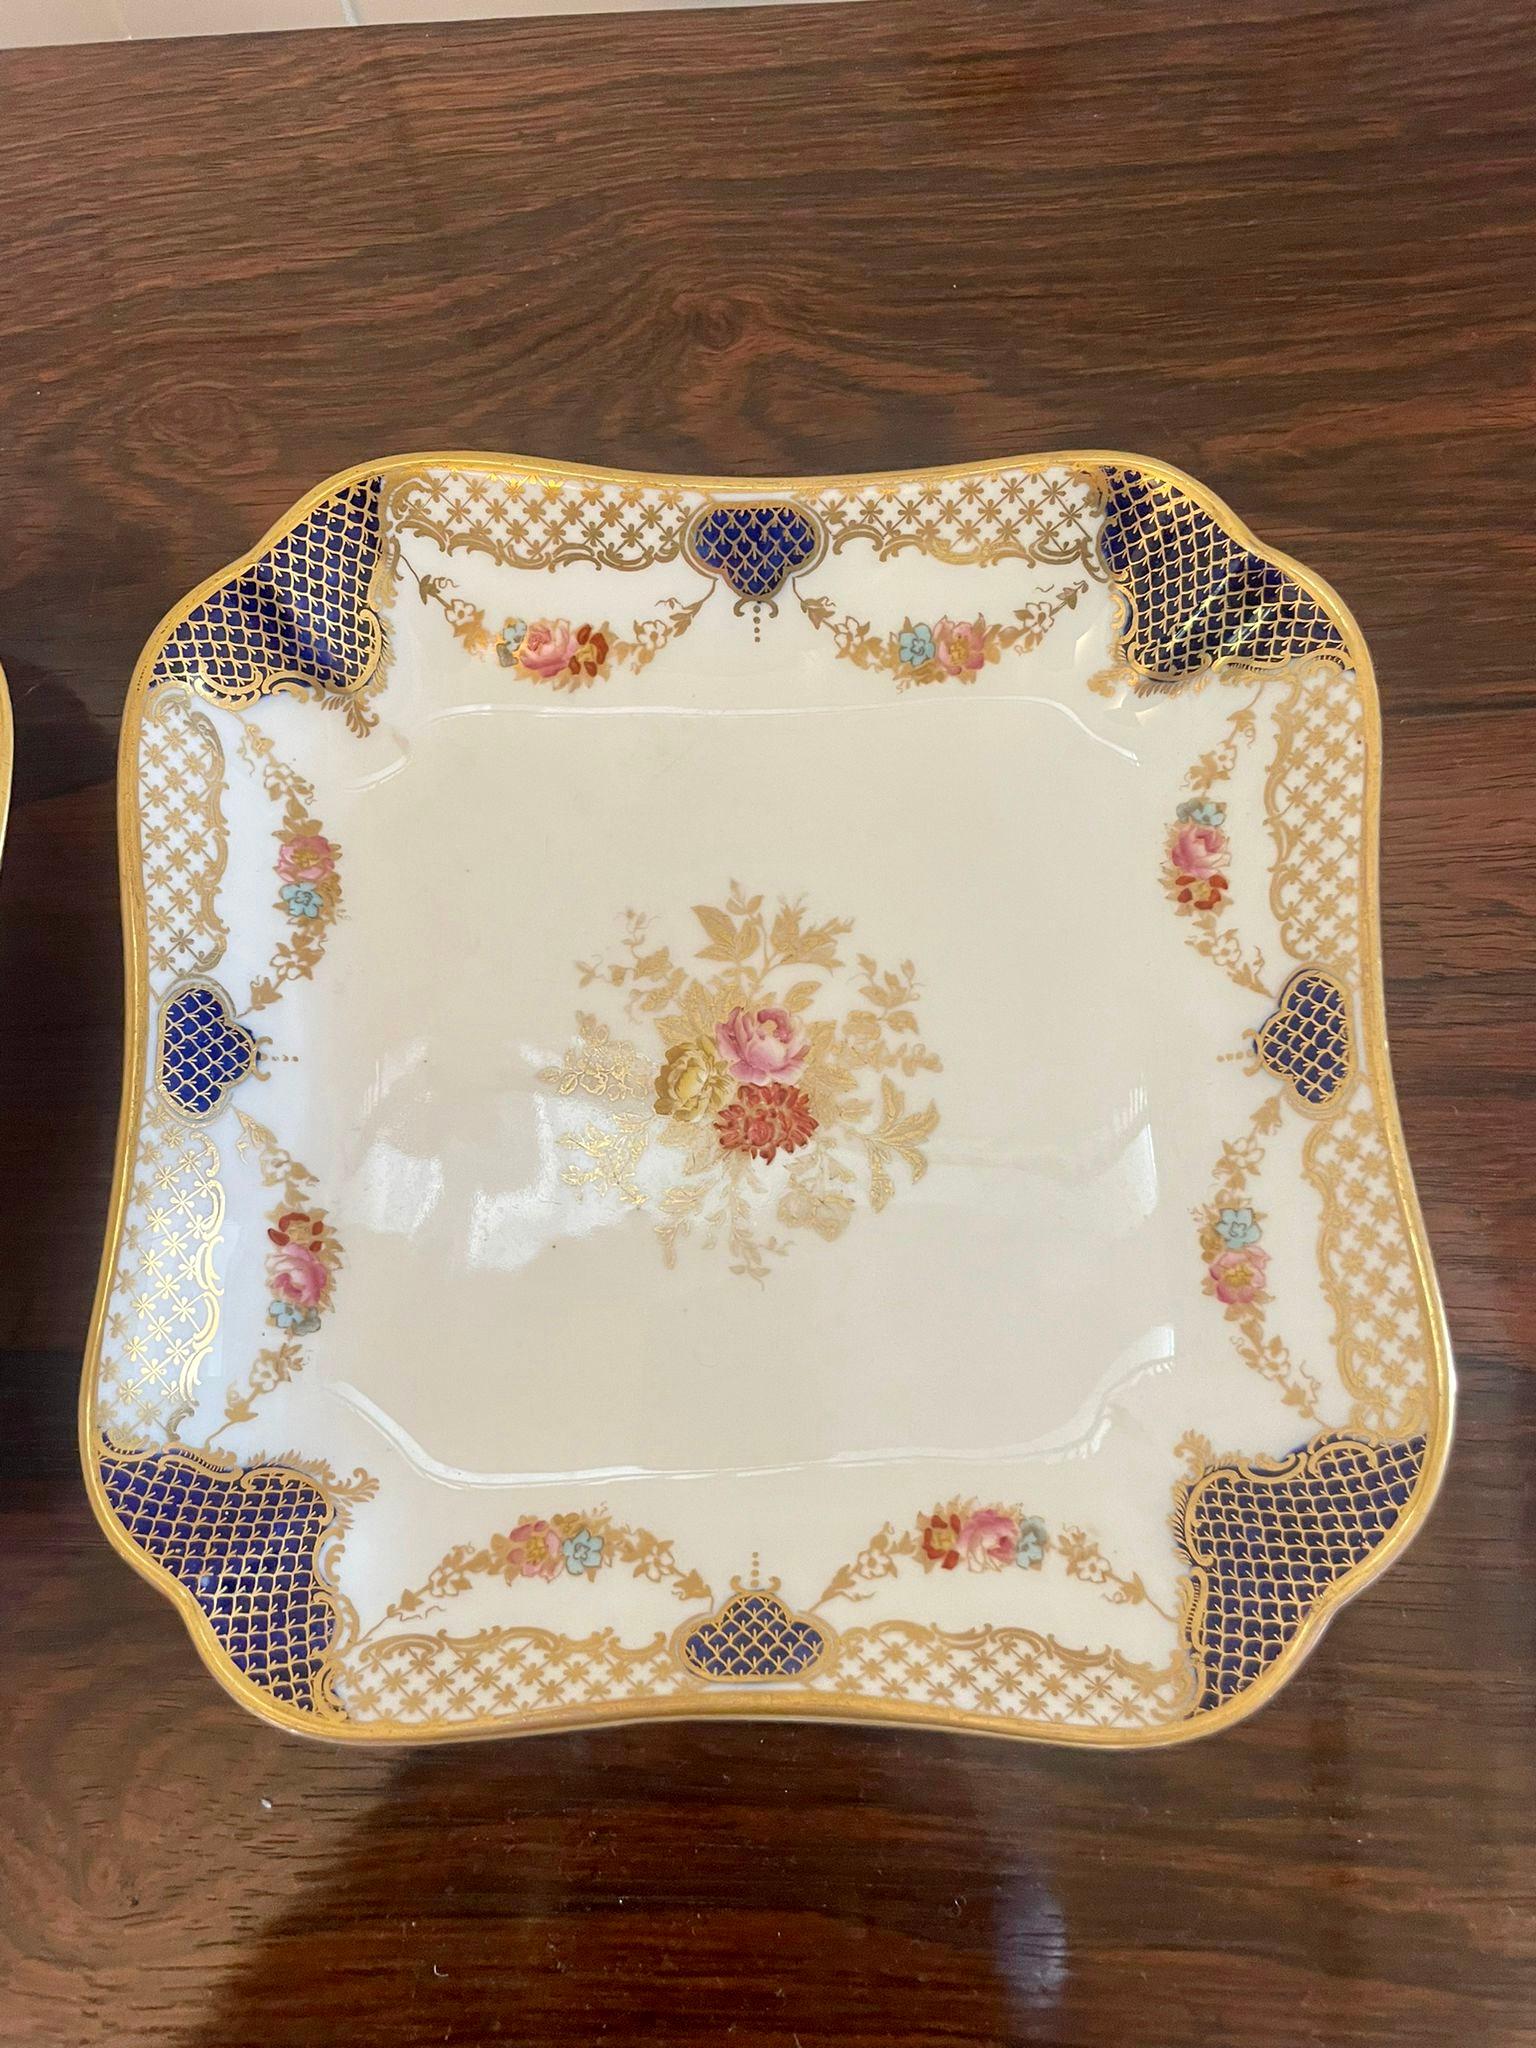 Superb quality pair of antique Edwardian hand painted Wedgwood shaped dishes having a pair of antique Edwardian Wedgwood shaped dishes with fantastic quality hand painted decoration in red, pink, yellow, blue and gold colours 


Charming dishes in